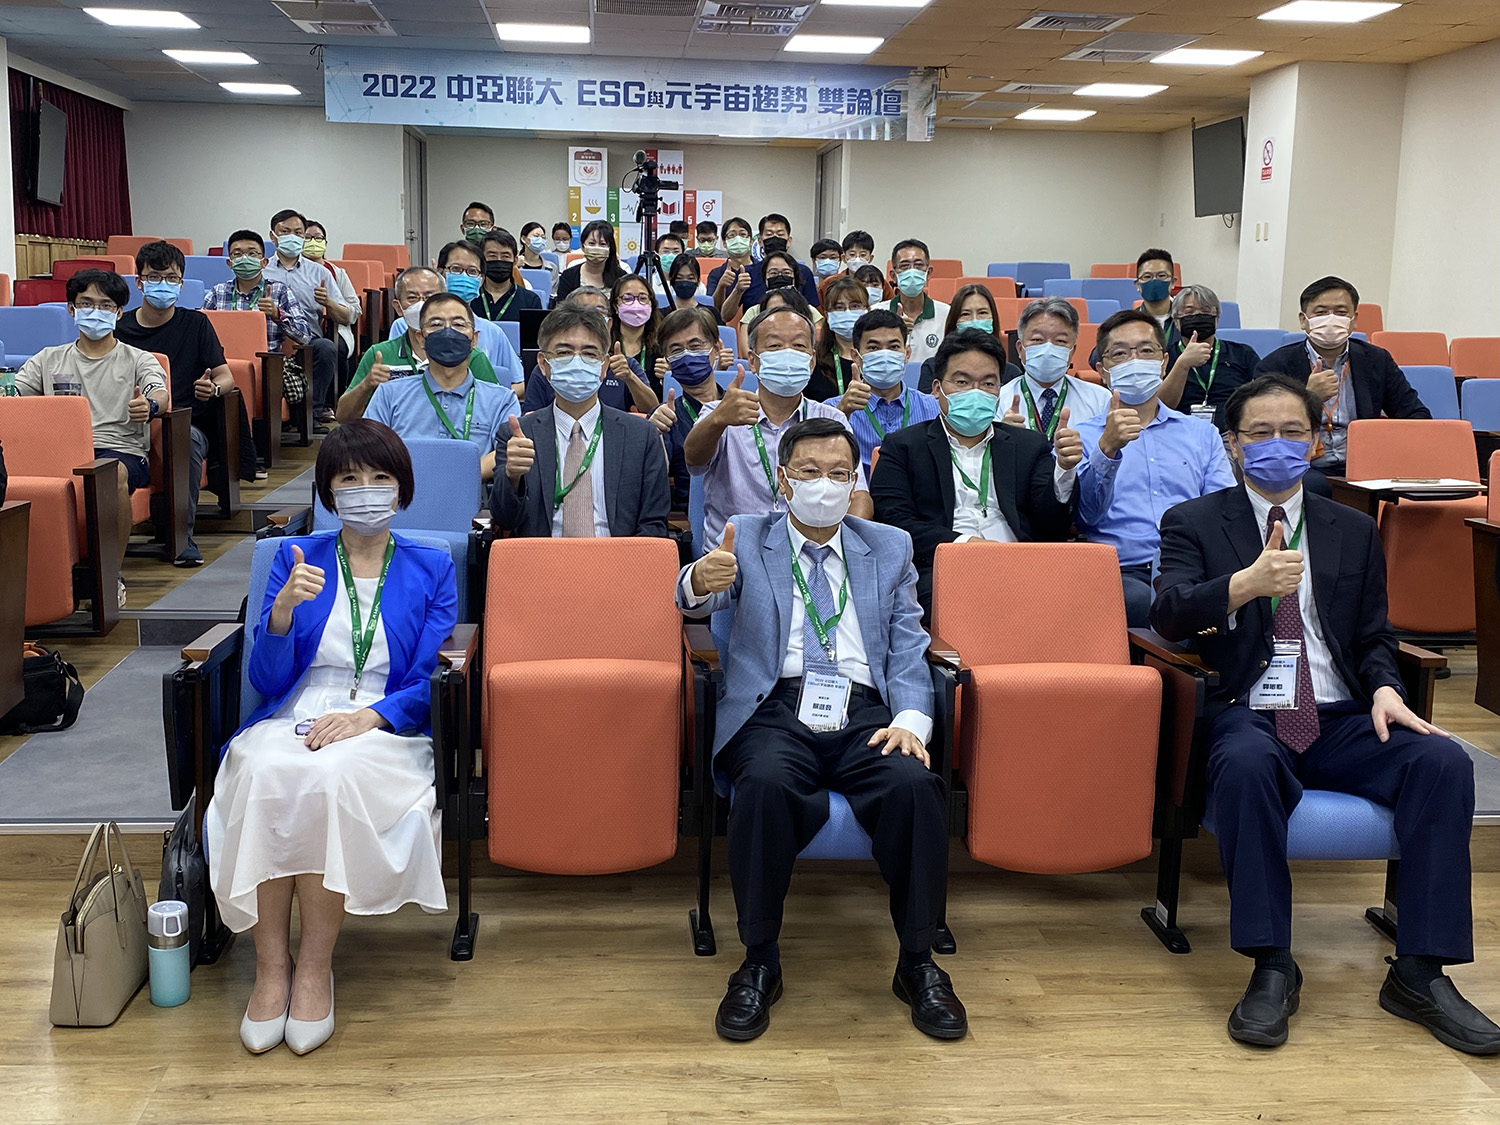 Professor Jeffrey J.P. Tsai (front middle), President of Asia University, and Professor Joyn S. Kuo (front right), Vice President of China Medical University, joined 2022 ESG and Metaverse Forum